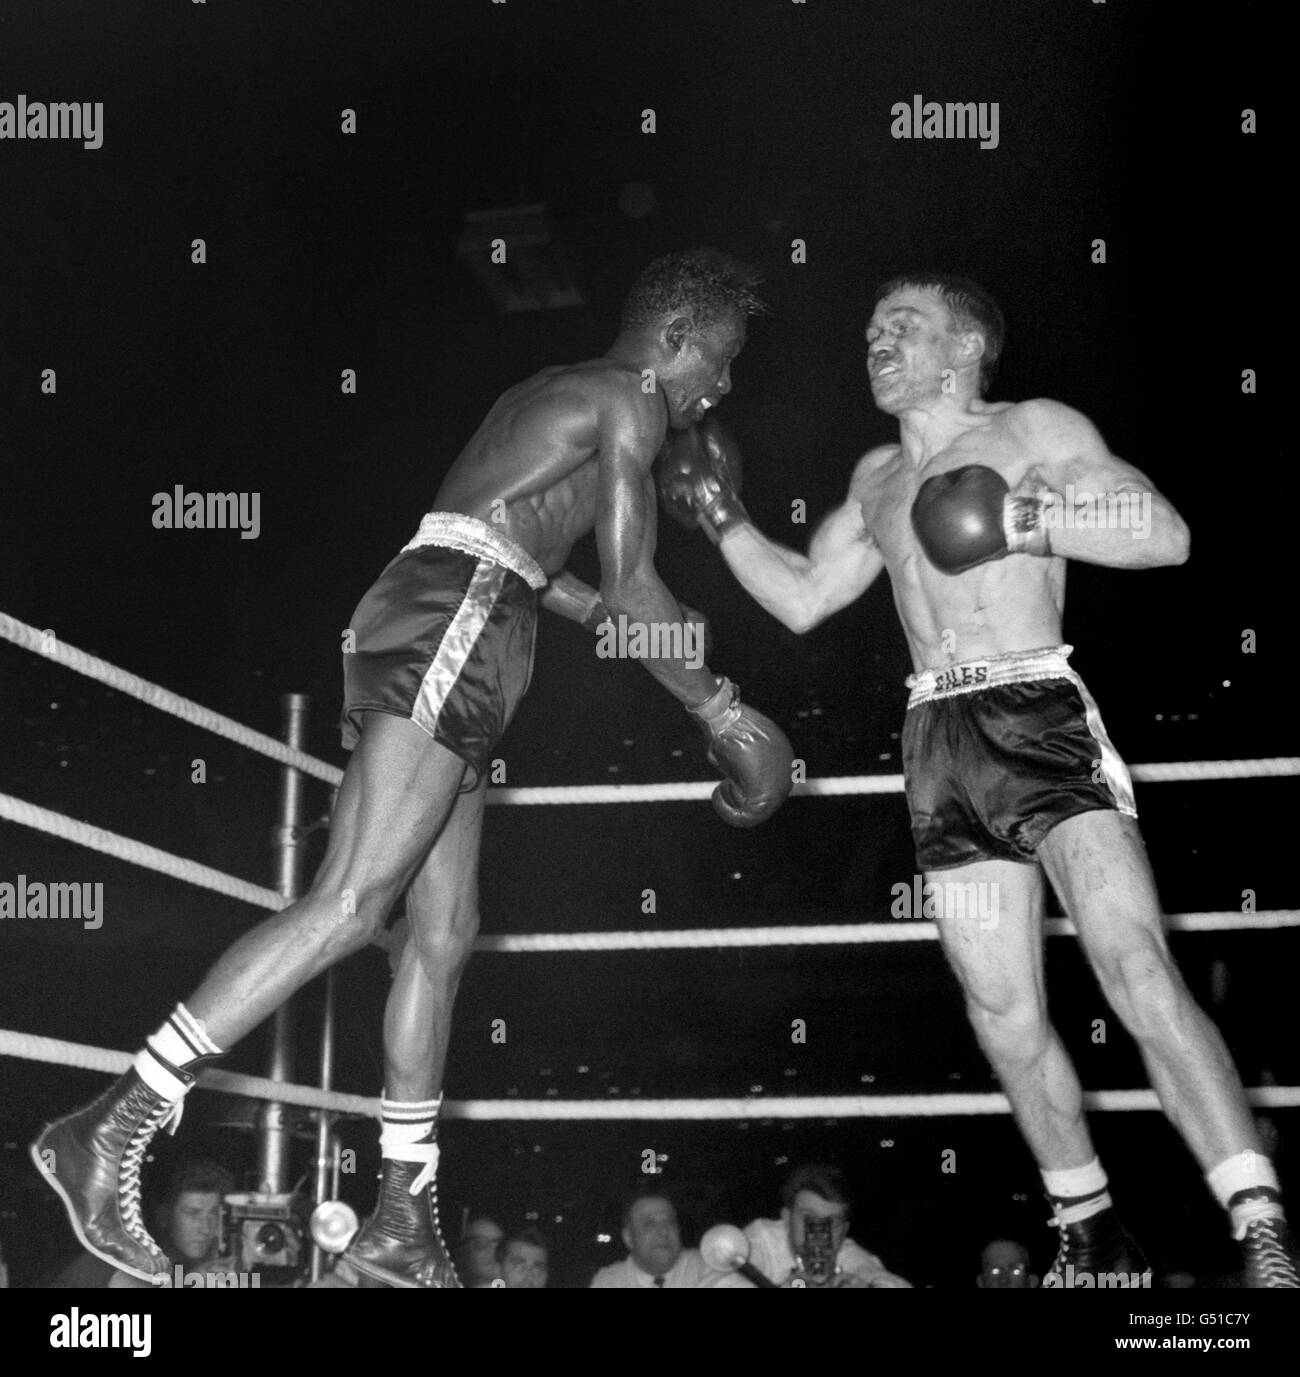 British challenger Dave Charnley (r) catches American Joe Brown on the chin during the fight. Joe Brown went on to win on points after 15 rounds. The fight was voted 1961 Ring Magazine Fight of the Year. Stock Photo